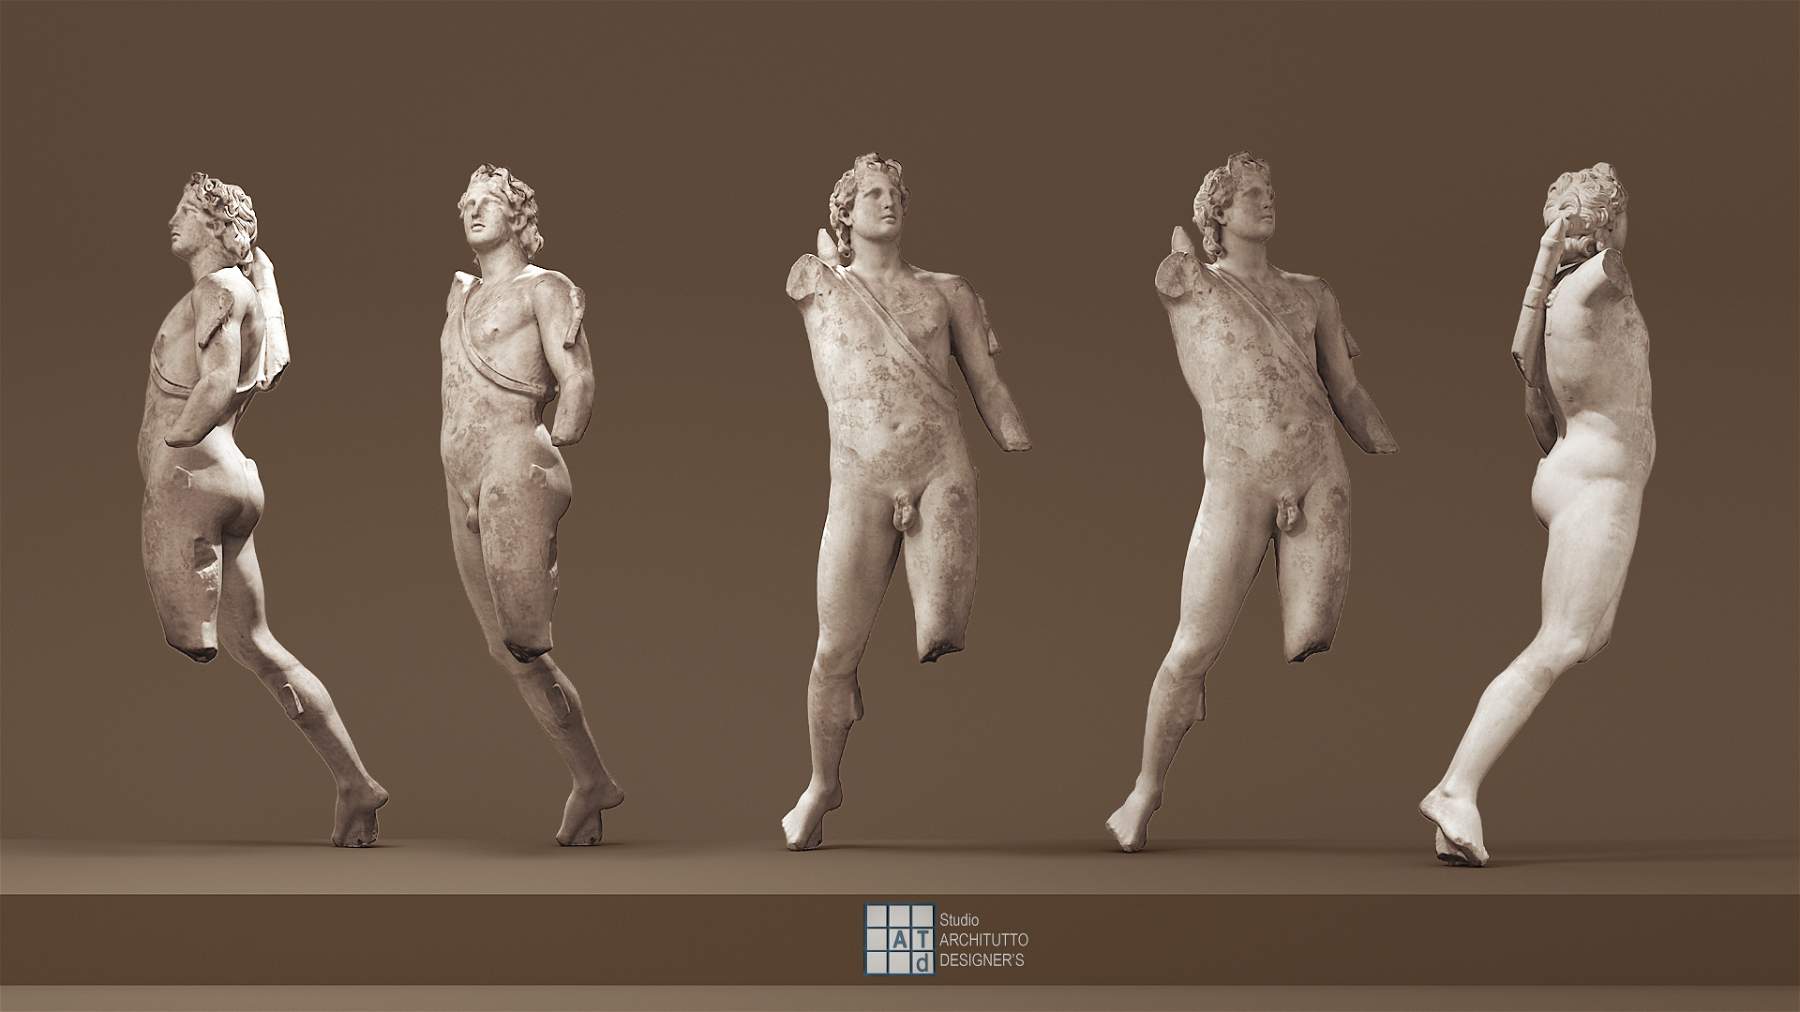 The National Museum of Civitavecchia reopens by exhibiting the... Colossus of Rhodes!